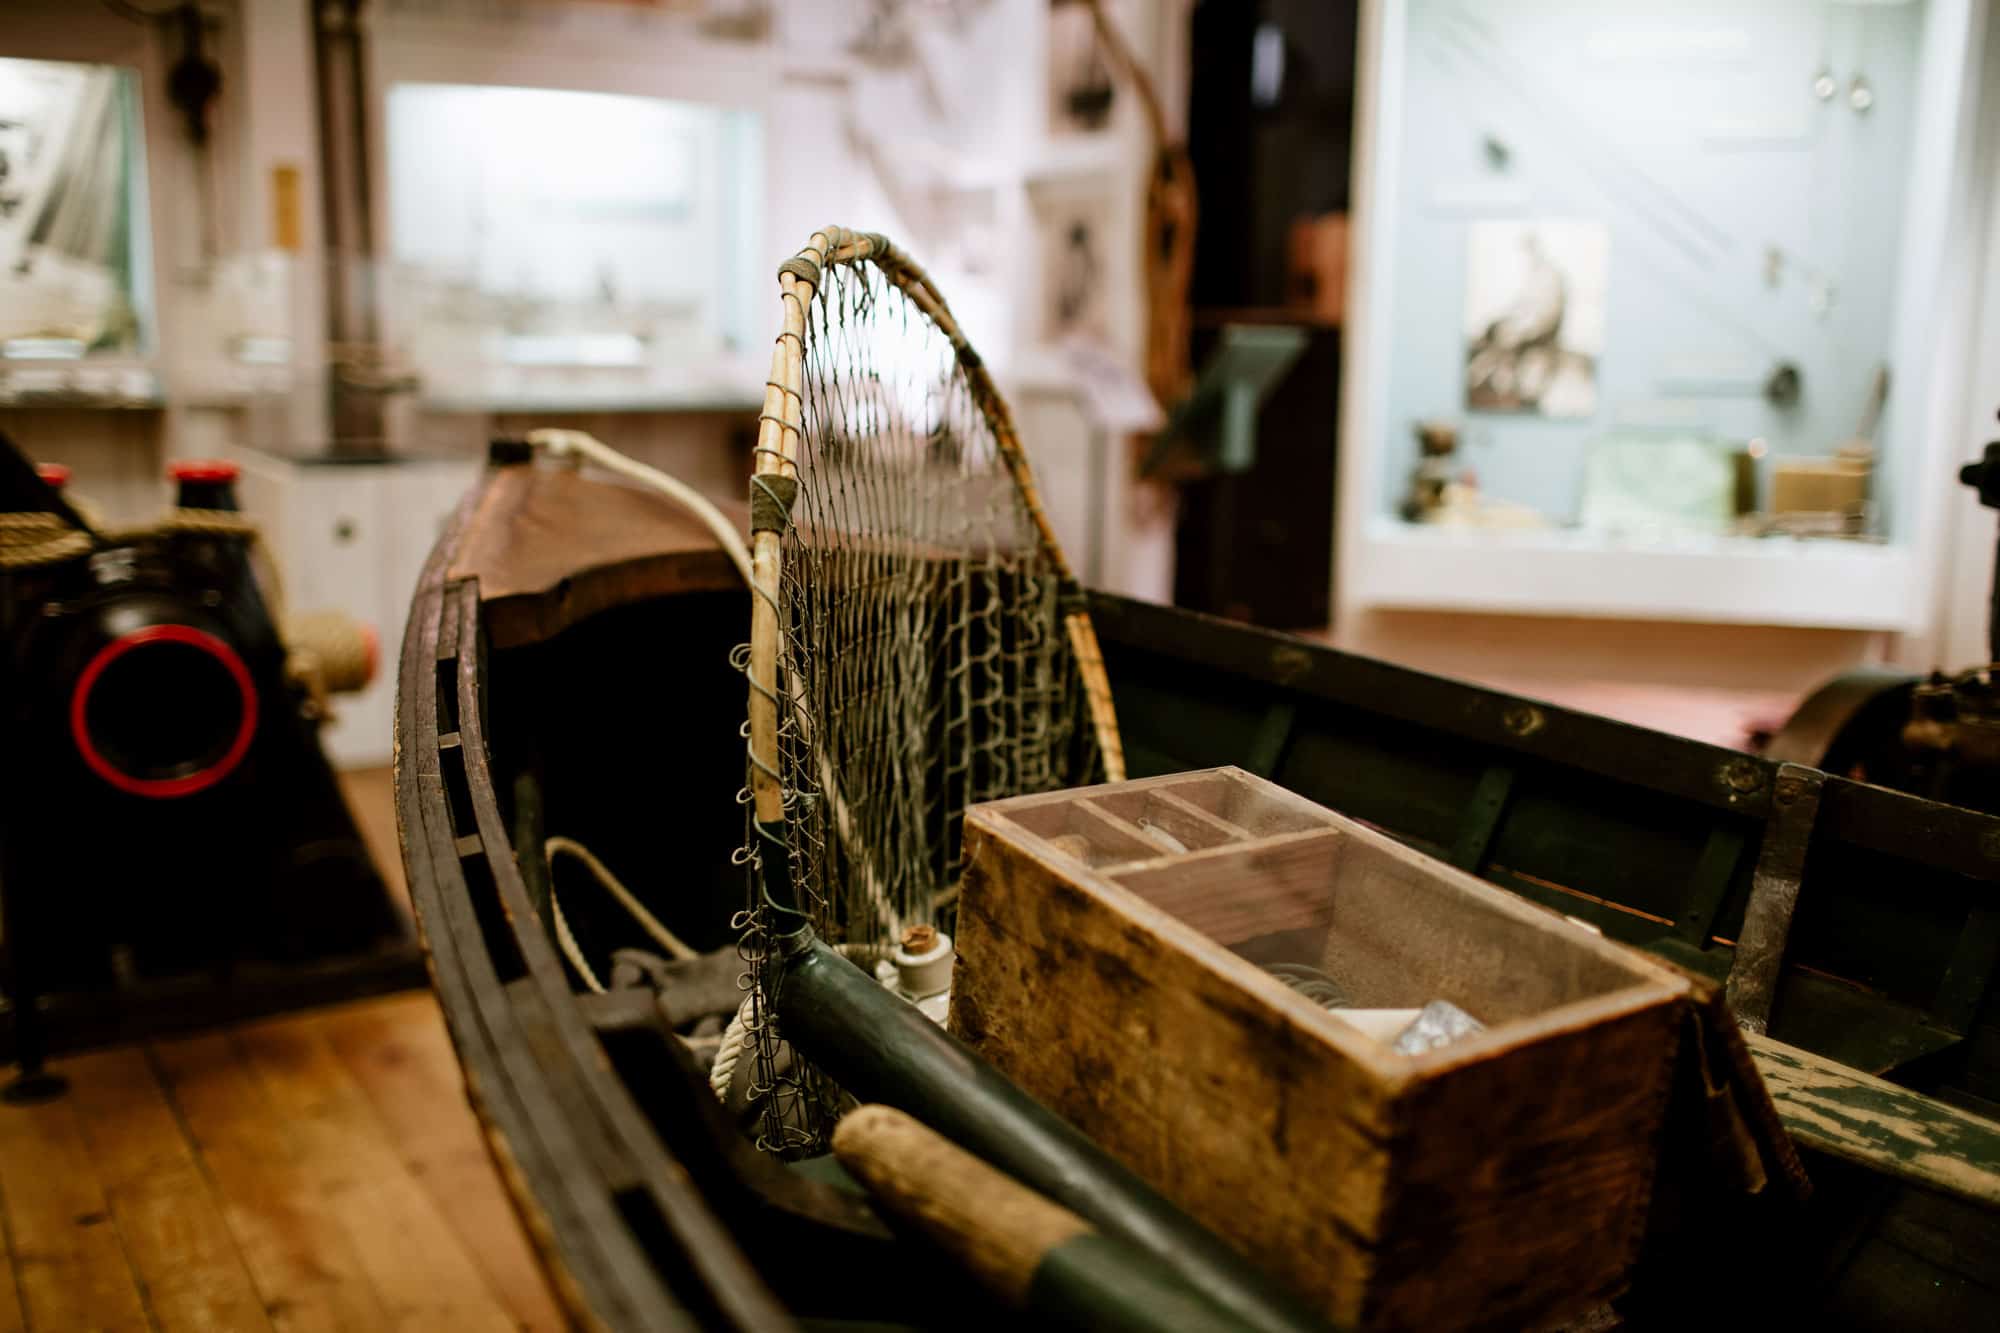 Sport Fishing Exhibit at the Museum at Campbell River